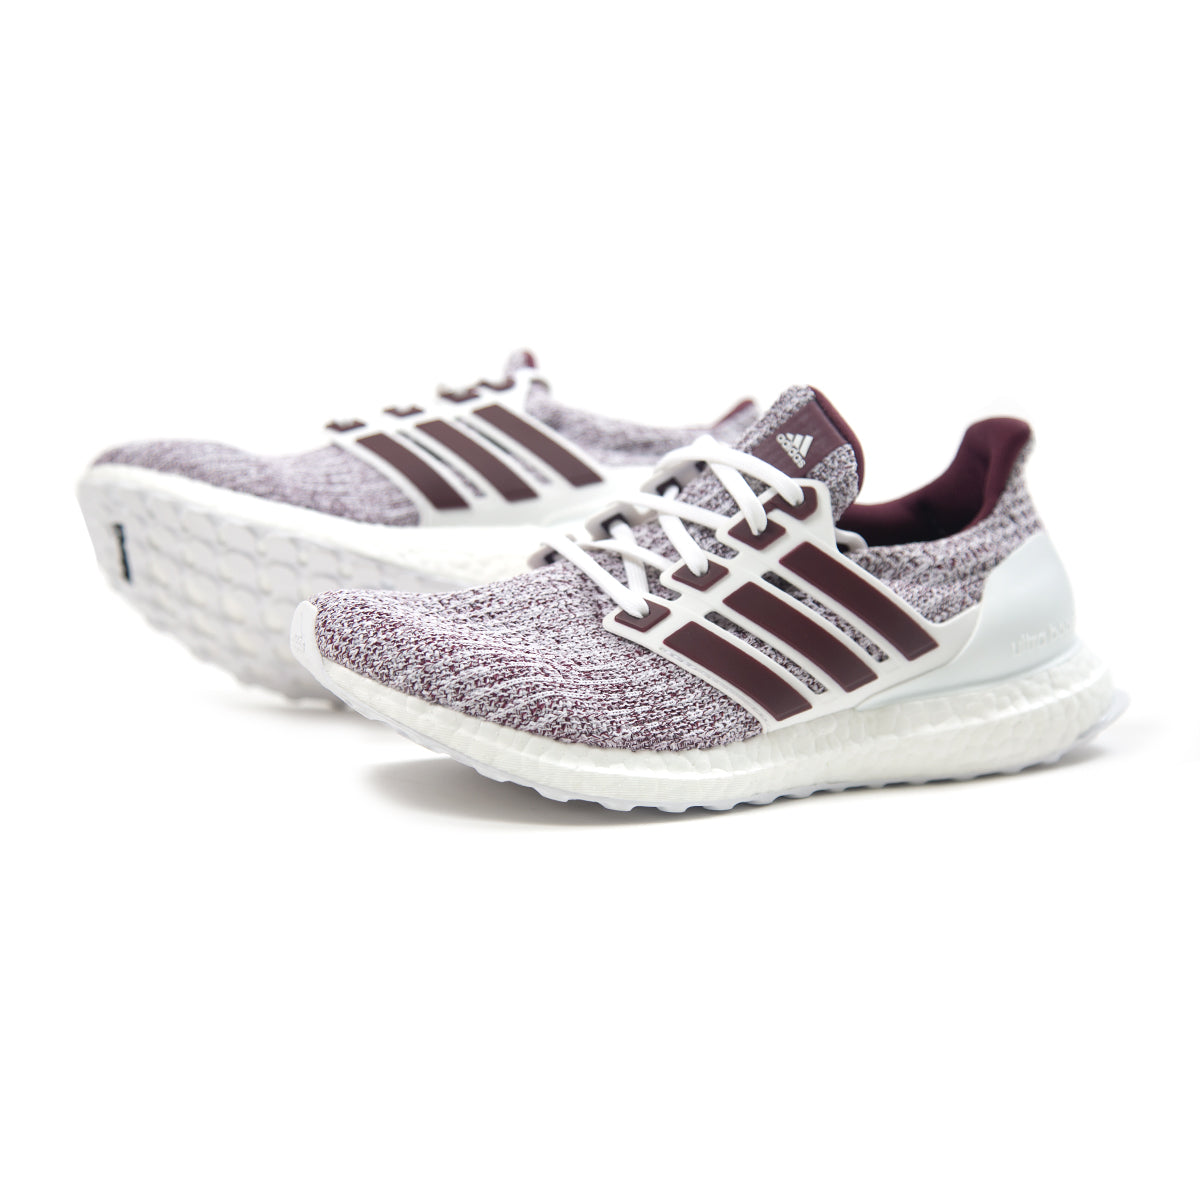 adidas ultra boost maroon and white